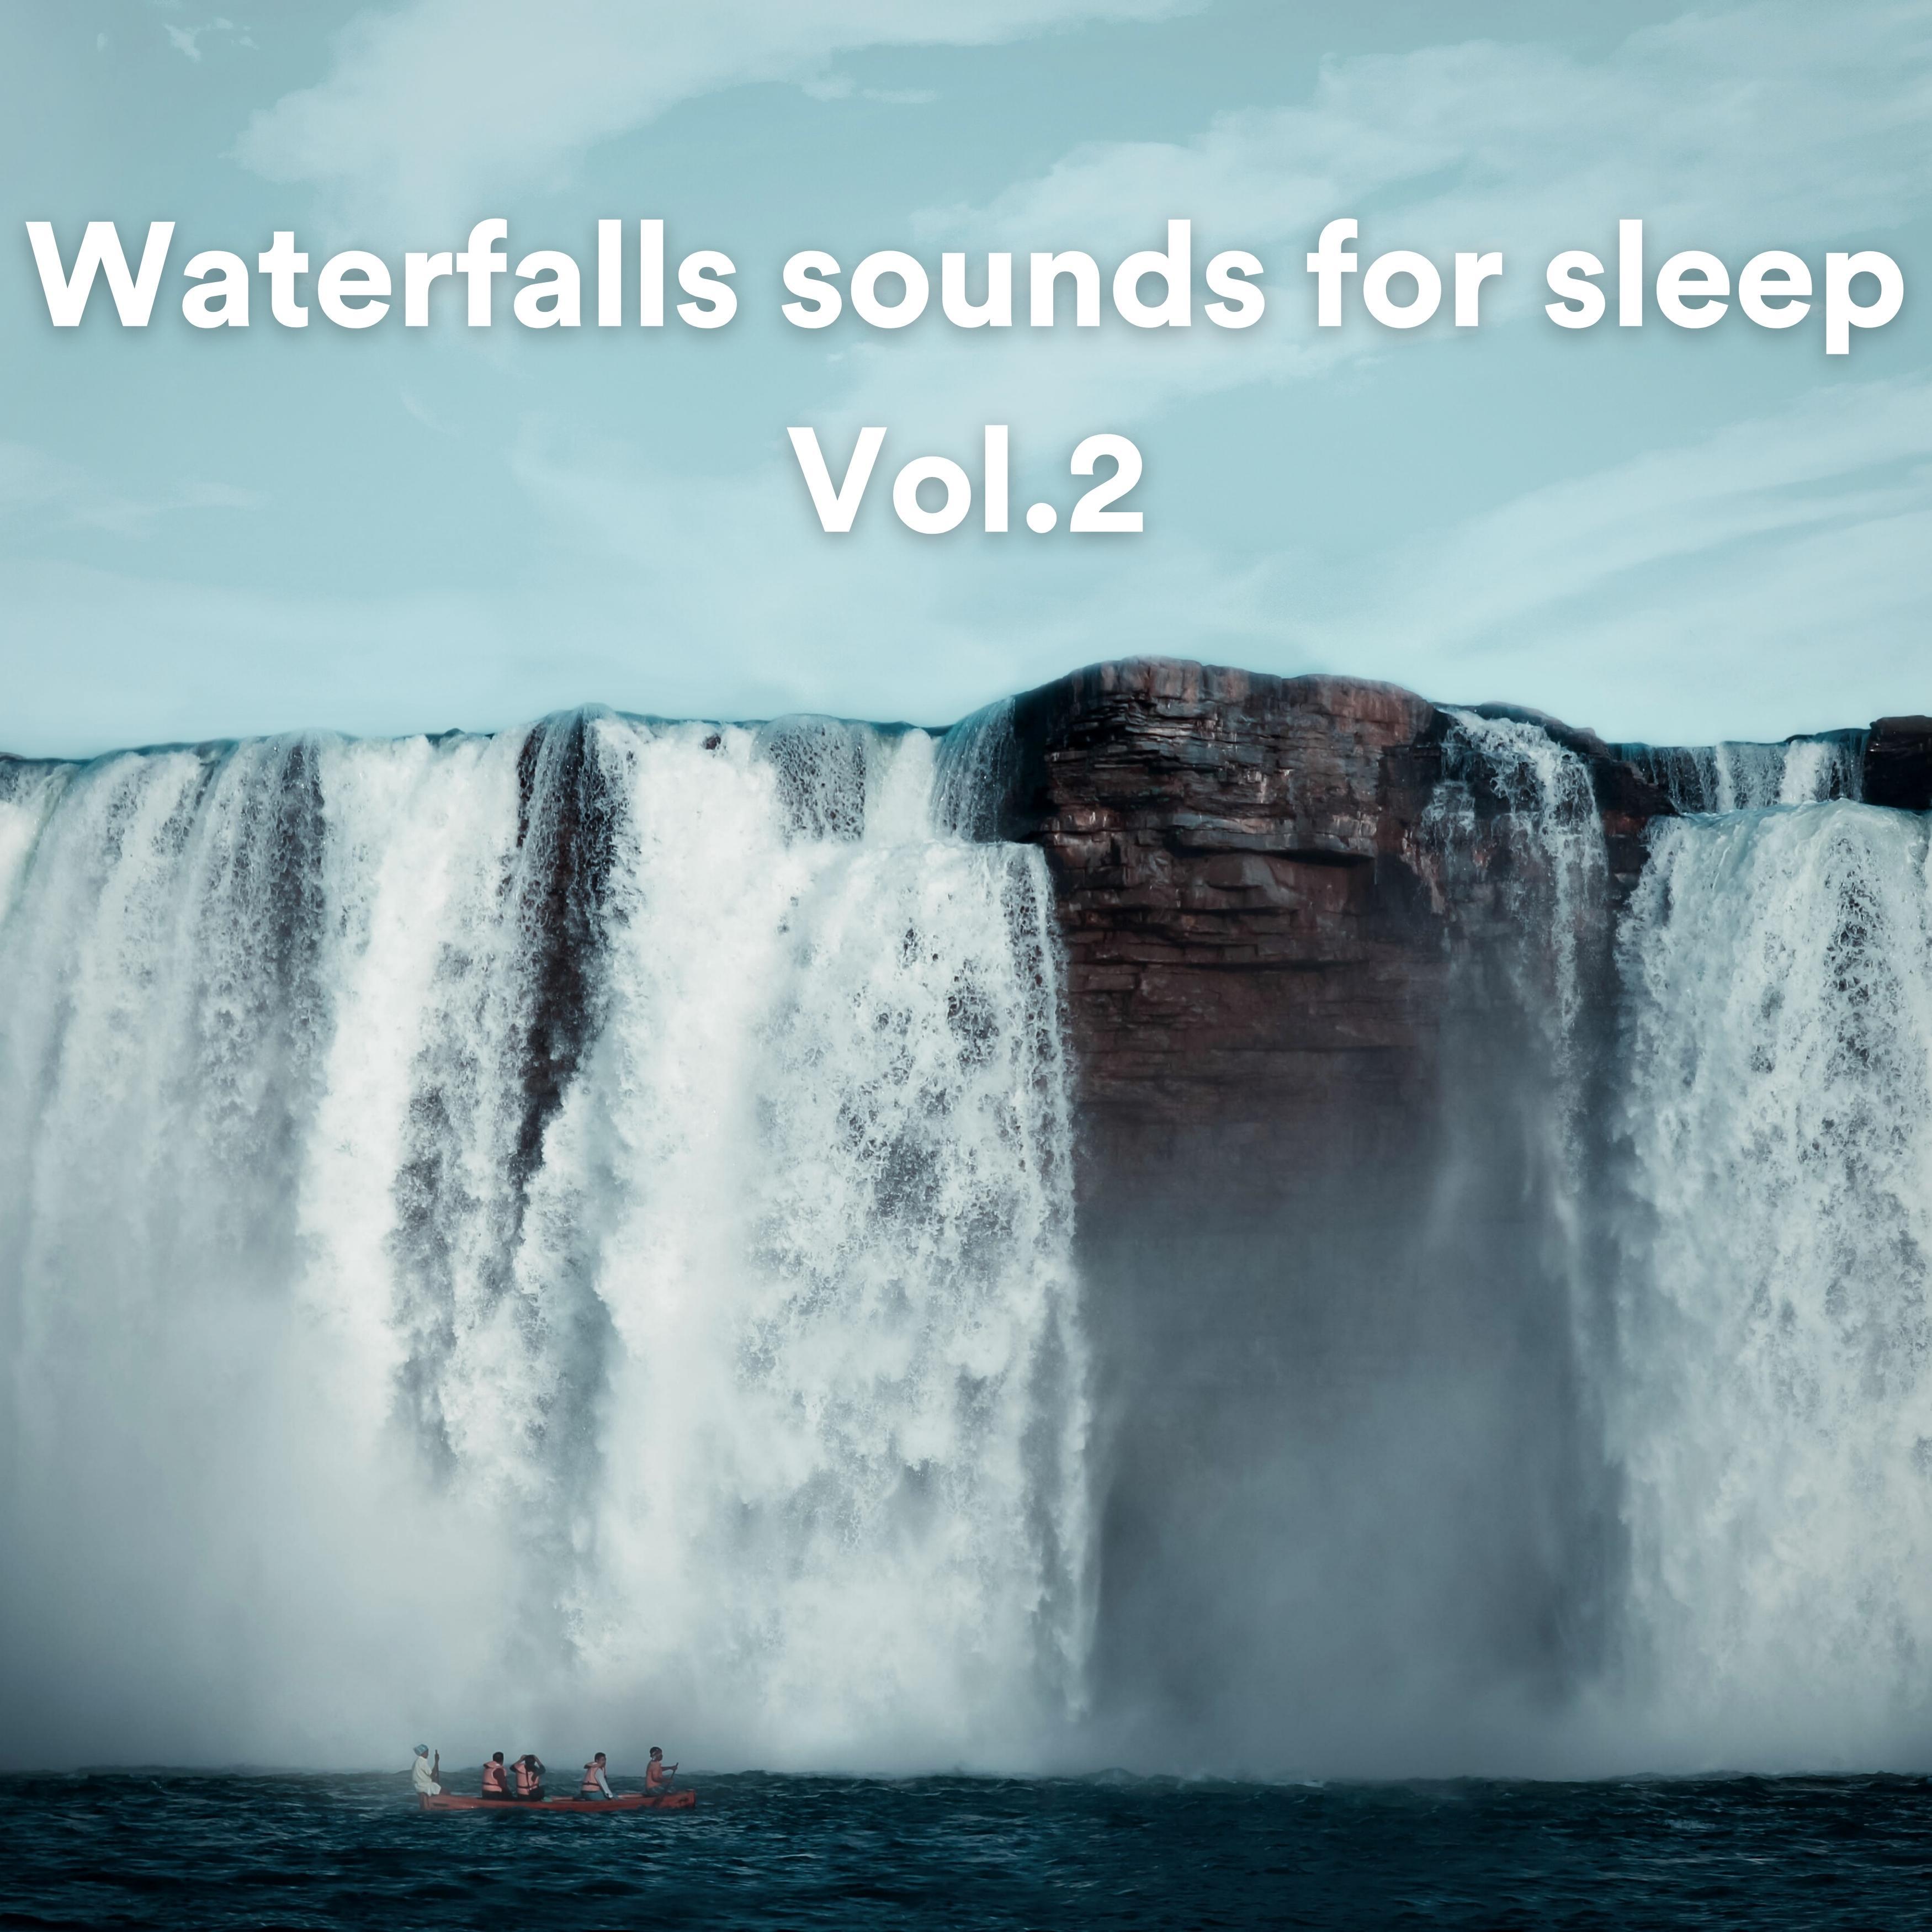 Water Soundscapes - Waterfall sounds for sleep, Pt. 22